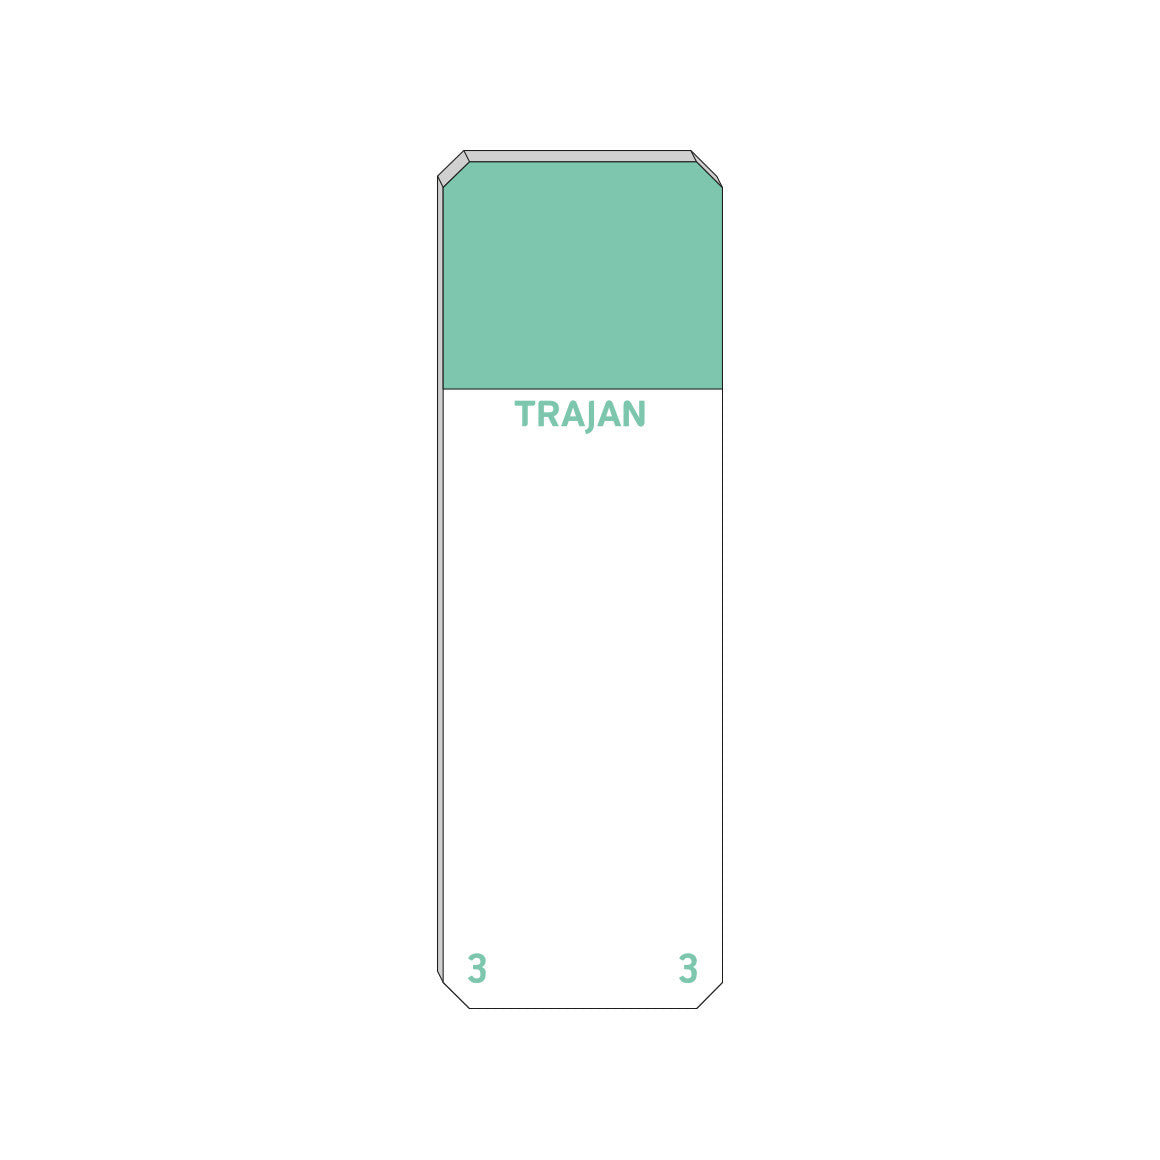 Trajan Scientific and Medical, Series 3 Adhesive Microscope Slides, Green, Frost 20 mm, 75 mm x 25 mm